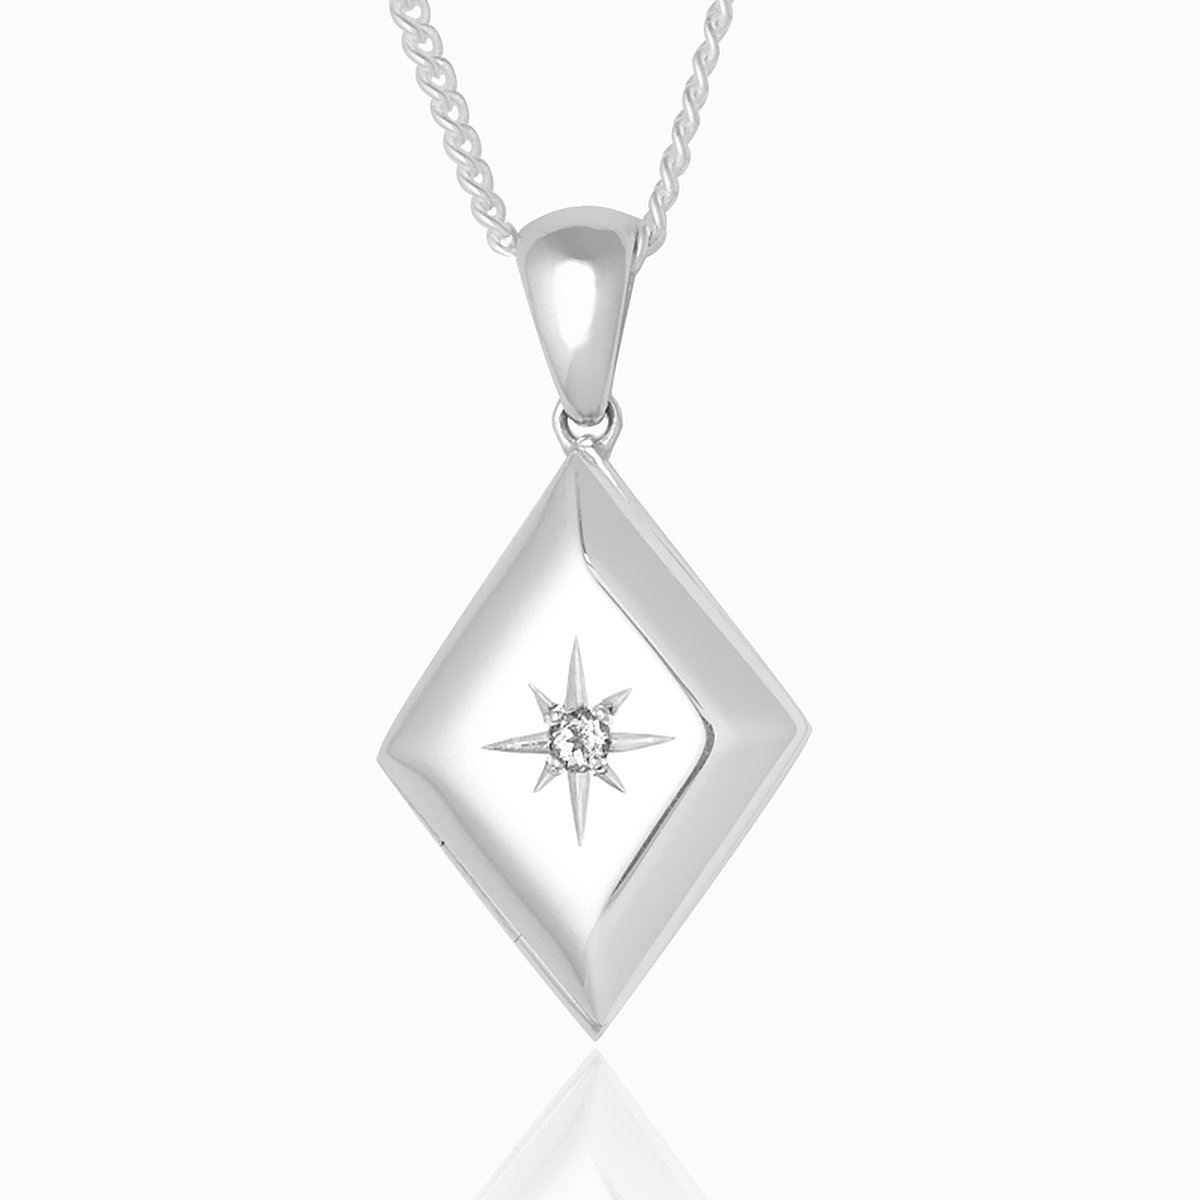 solid 925 sterling silver locket in a rhombus shape, star set with a 2mm cubic zirconia stone.